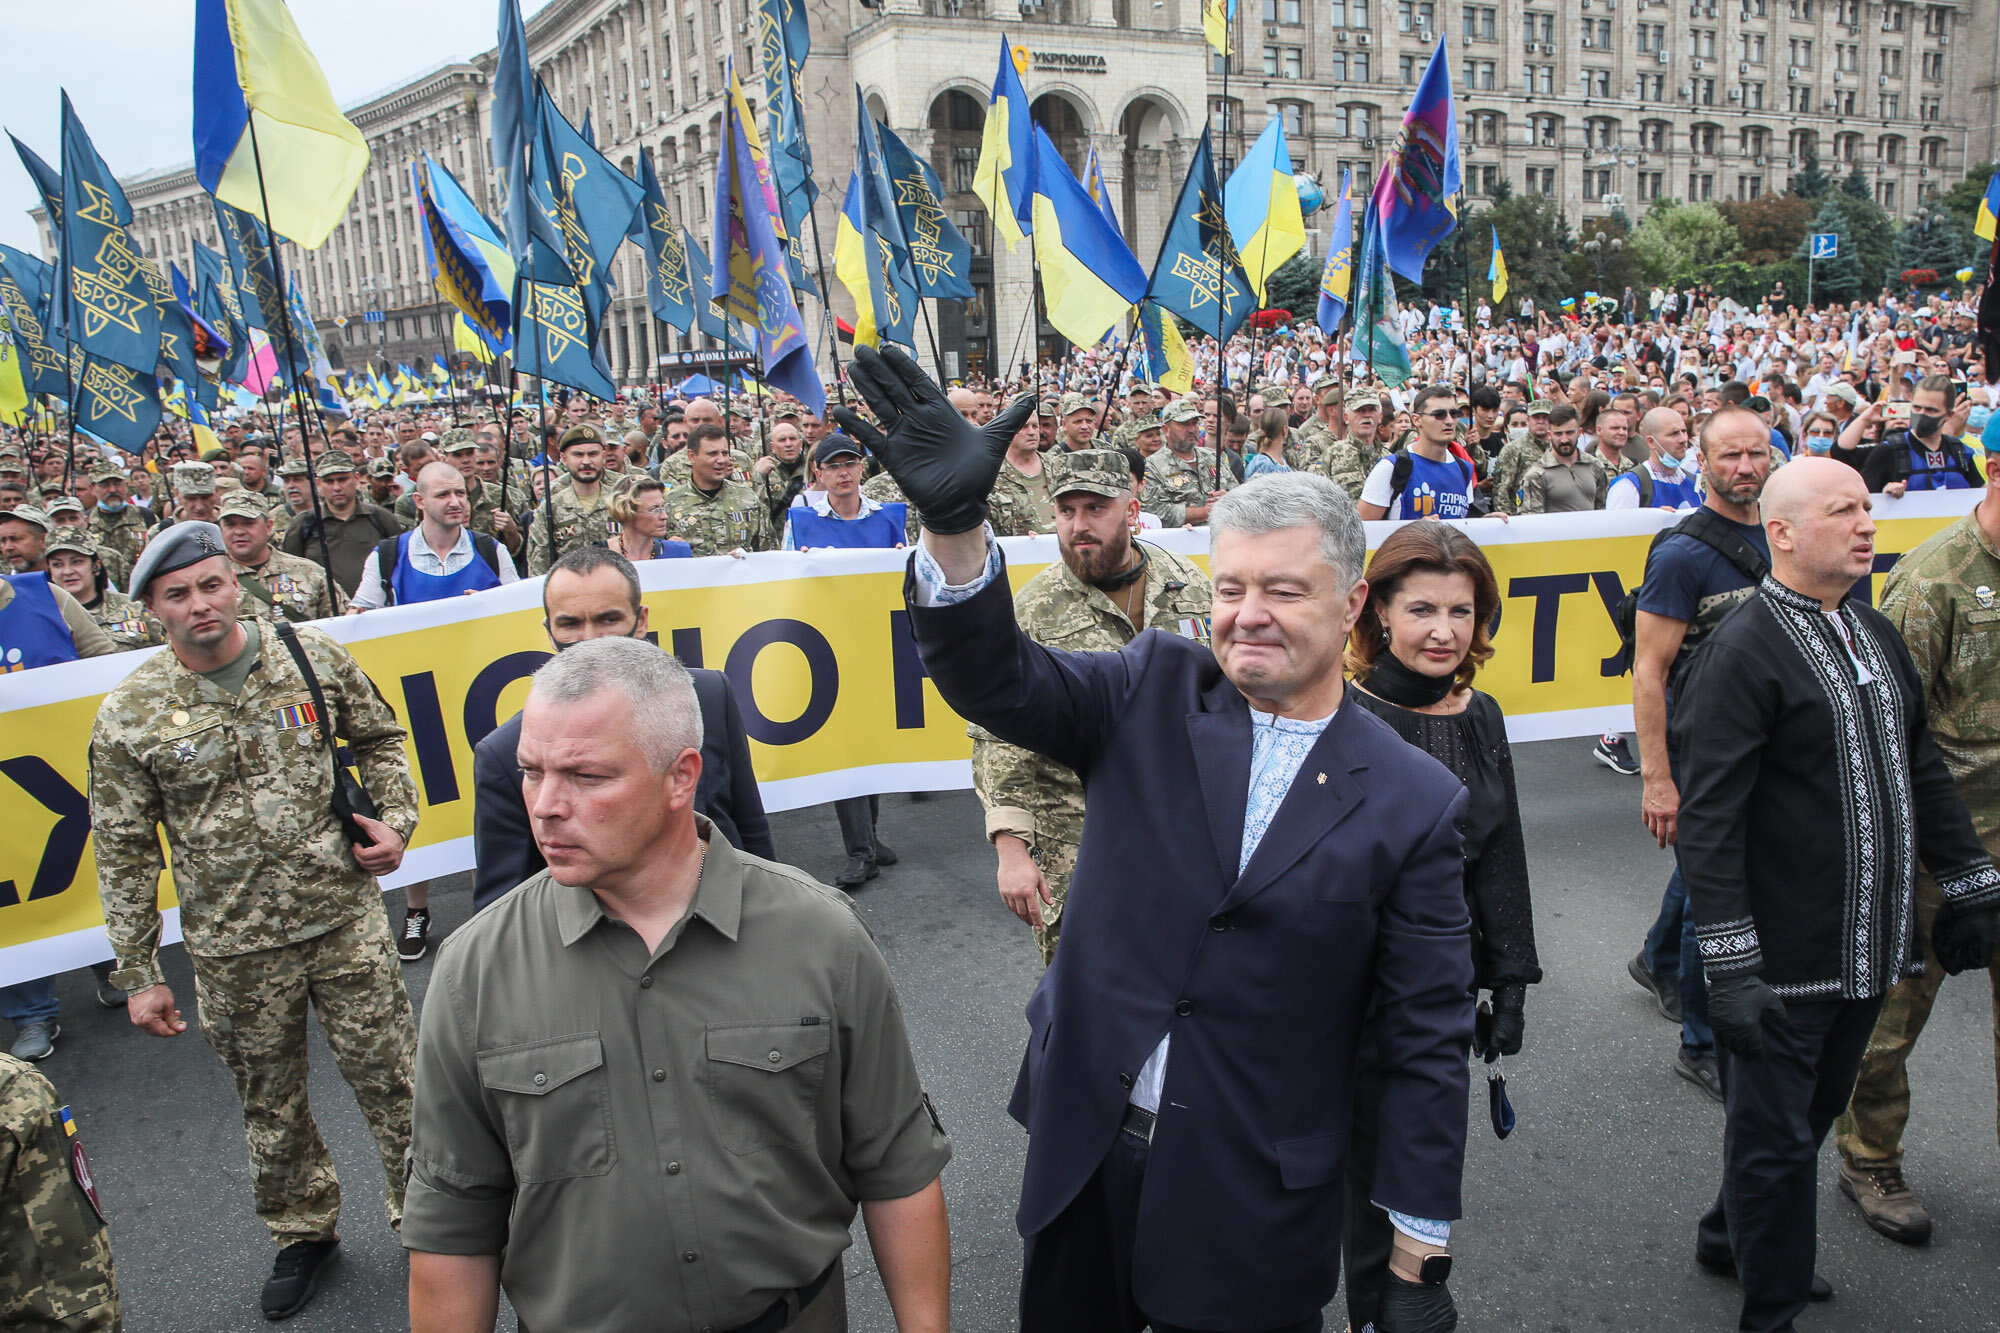 Ukraine’s fifth President Petro Poroshenko takes part in the March of Defenders of Ukraine, an event that celebrated Ukraine&#8217;s Independence Day in Kyiv on Aug. 24, 2020.